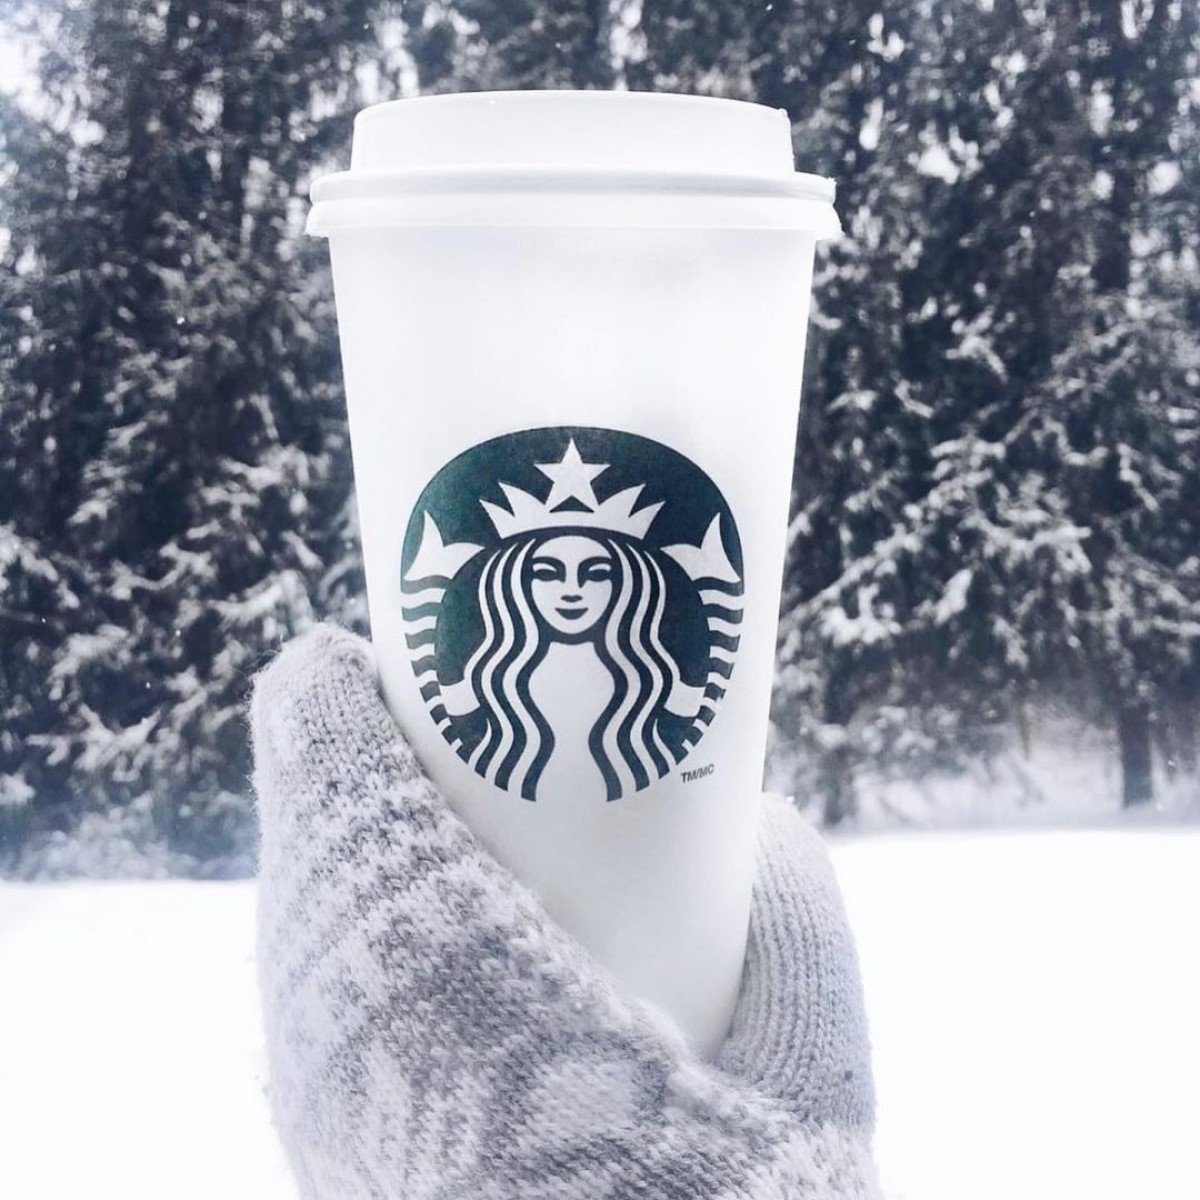 gloved hand holding up white starbucks paper cup in the snow